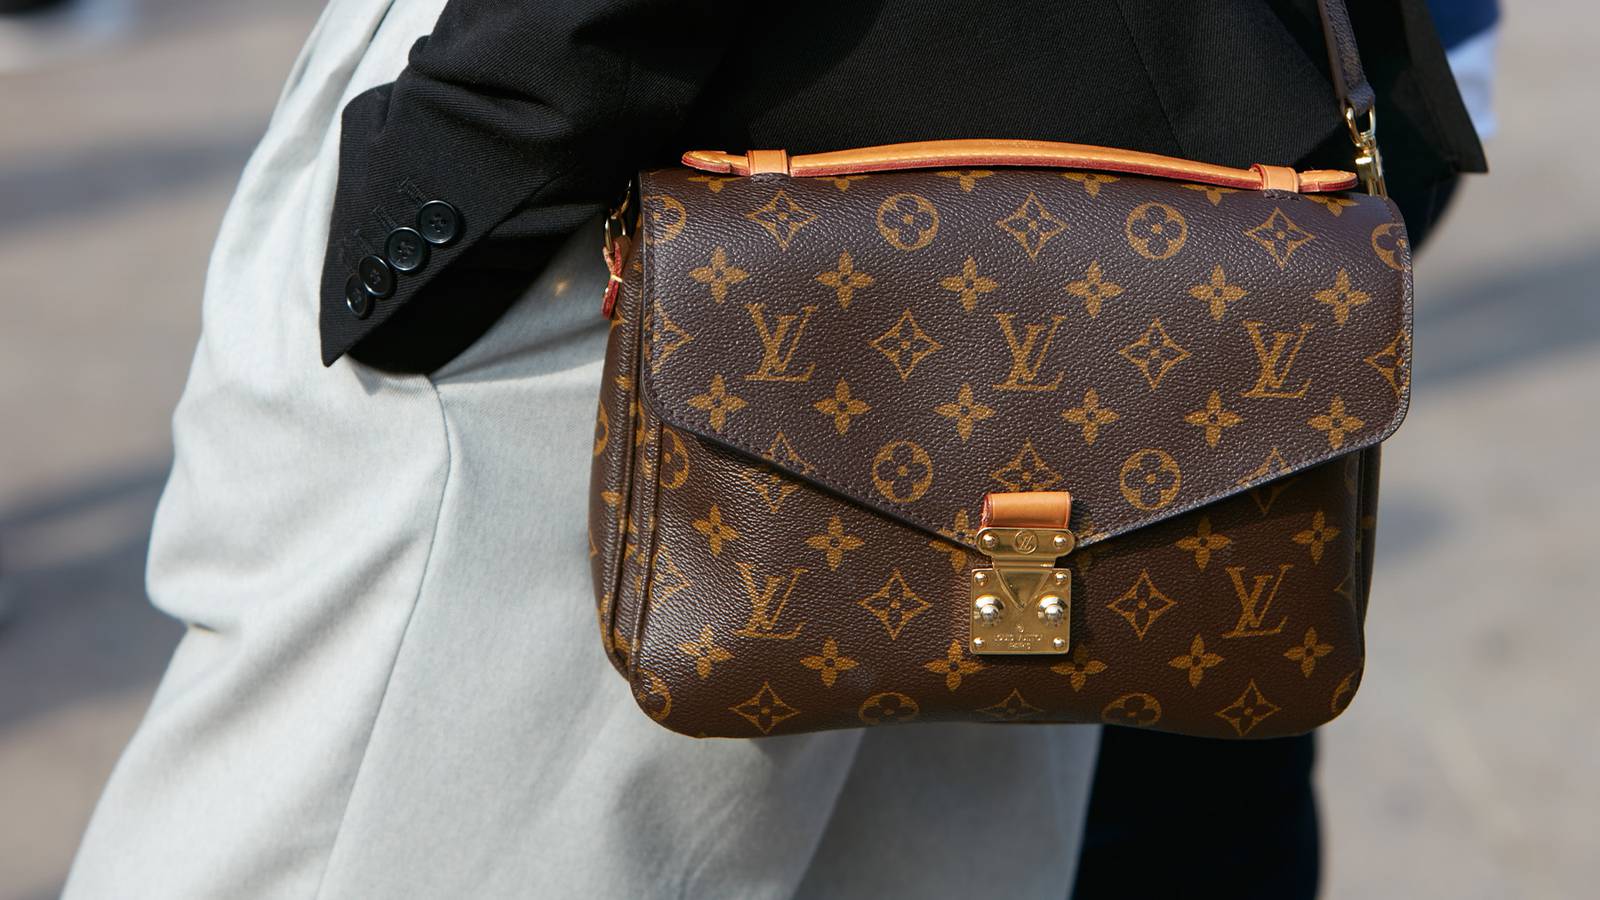 Watch LVMH's Sales Growth Slows as Global Luxury Demand Cools